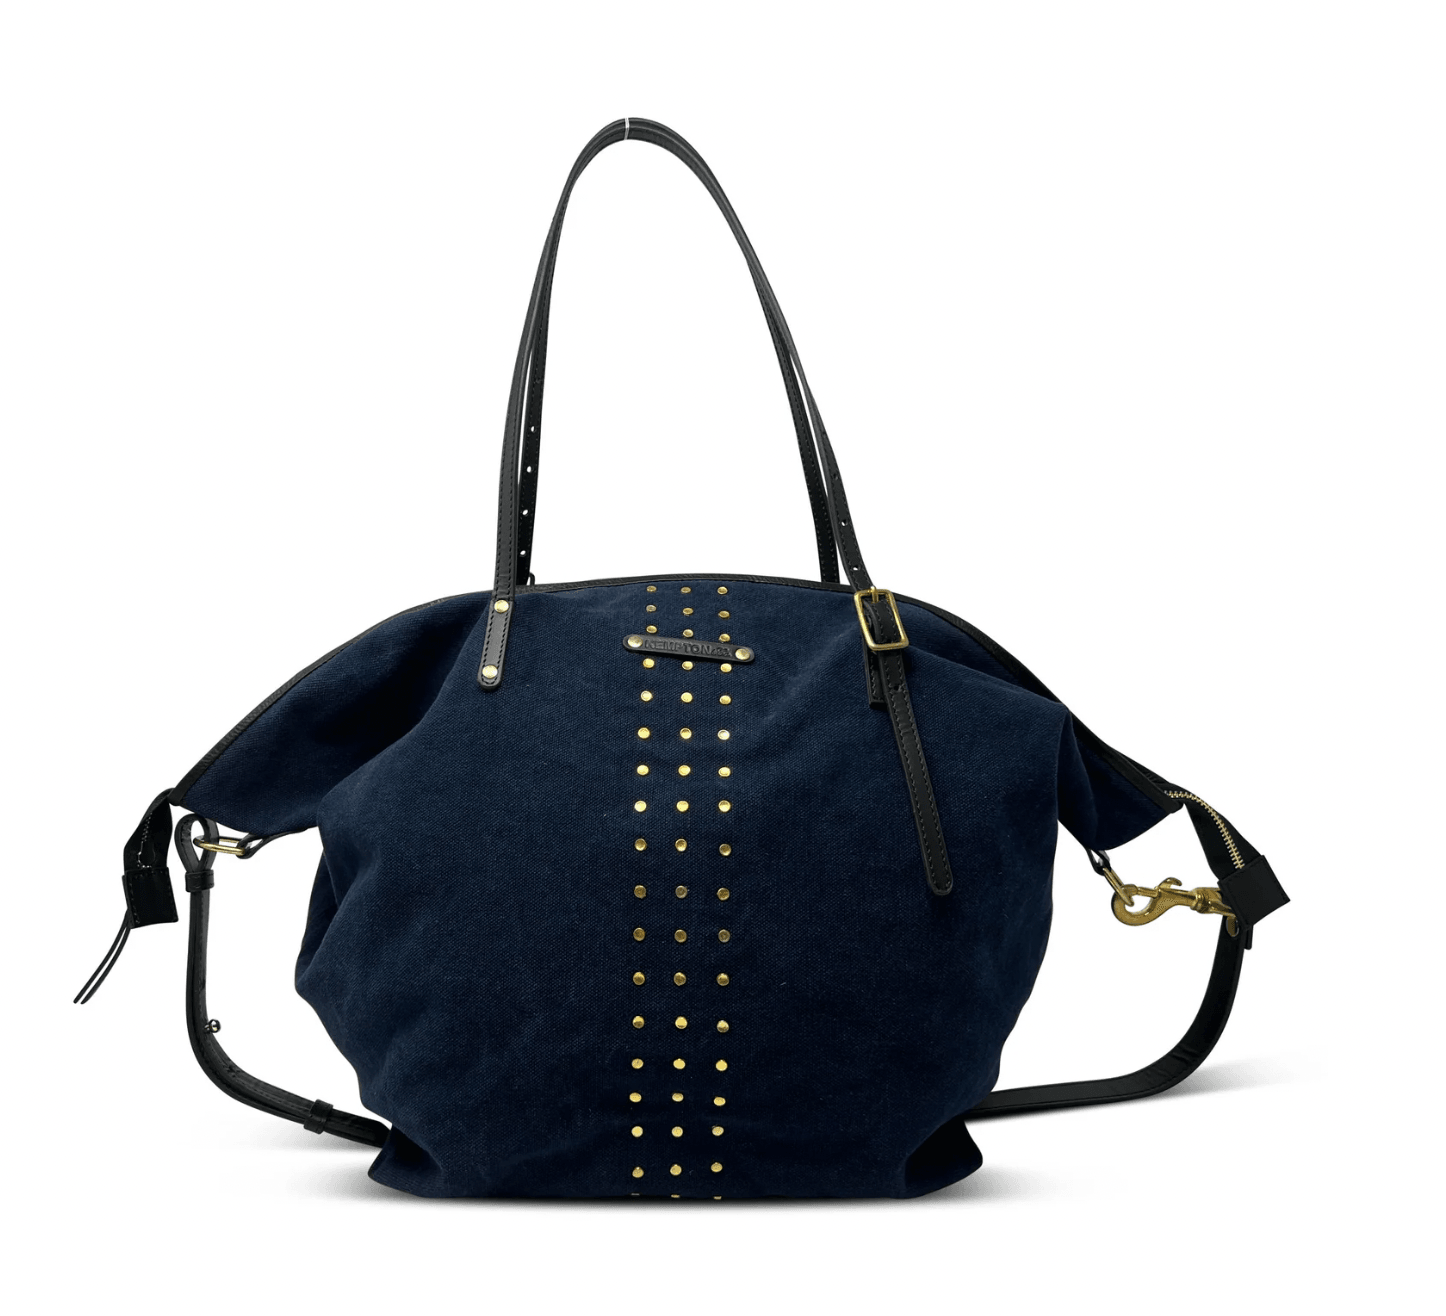 Washed Navy Canvas Crossbody Bag by Kempton & Co. - Haven